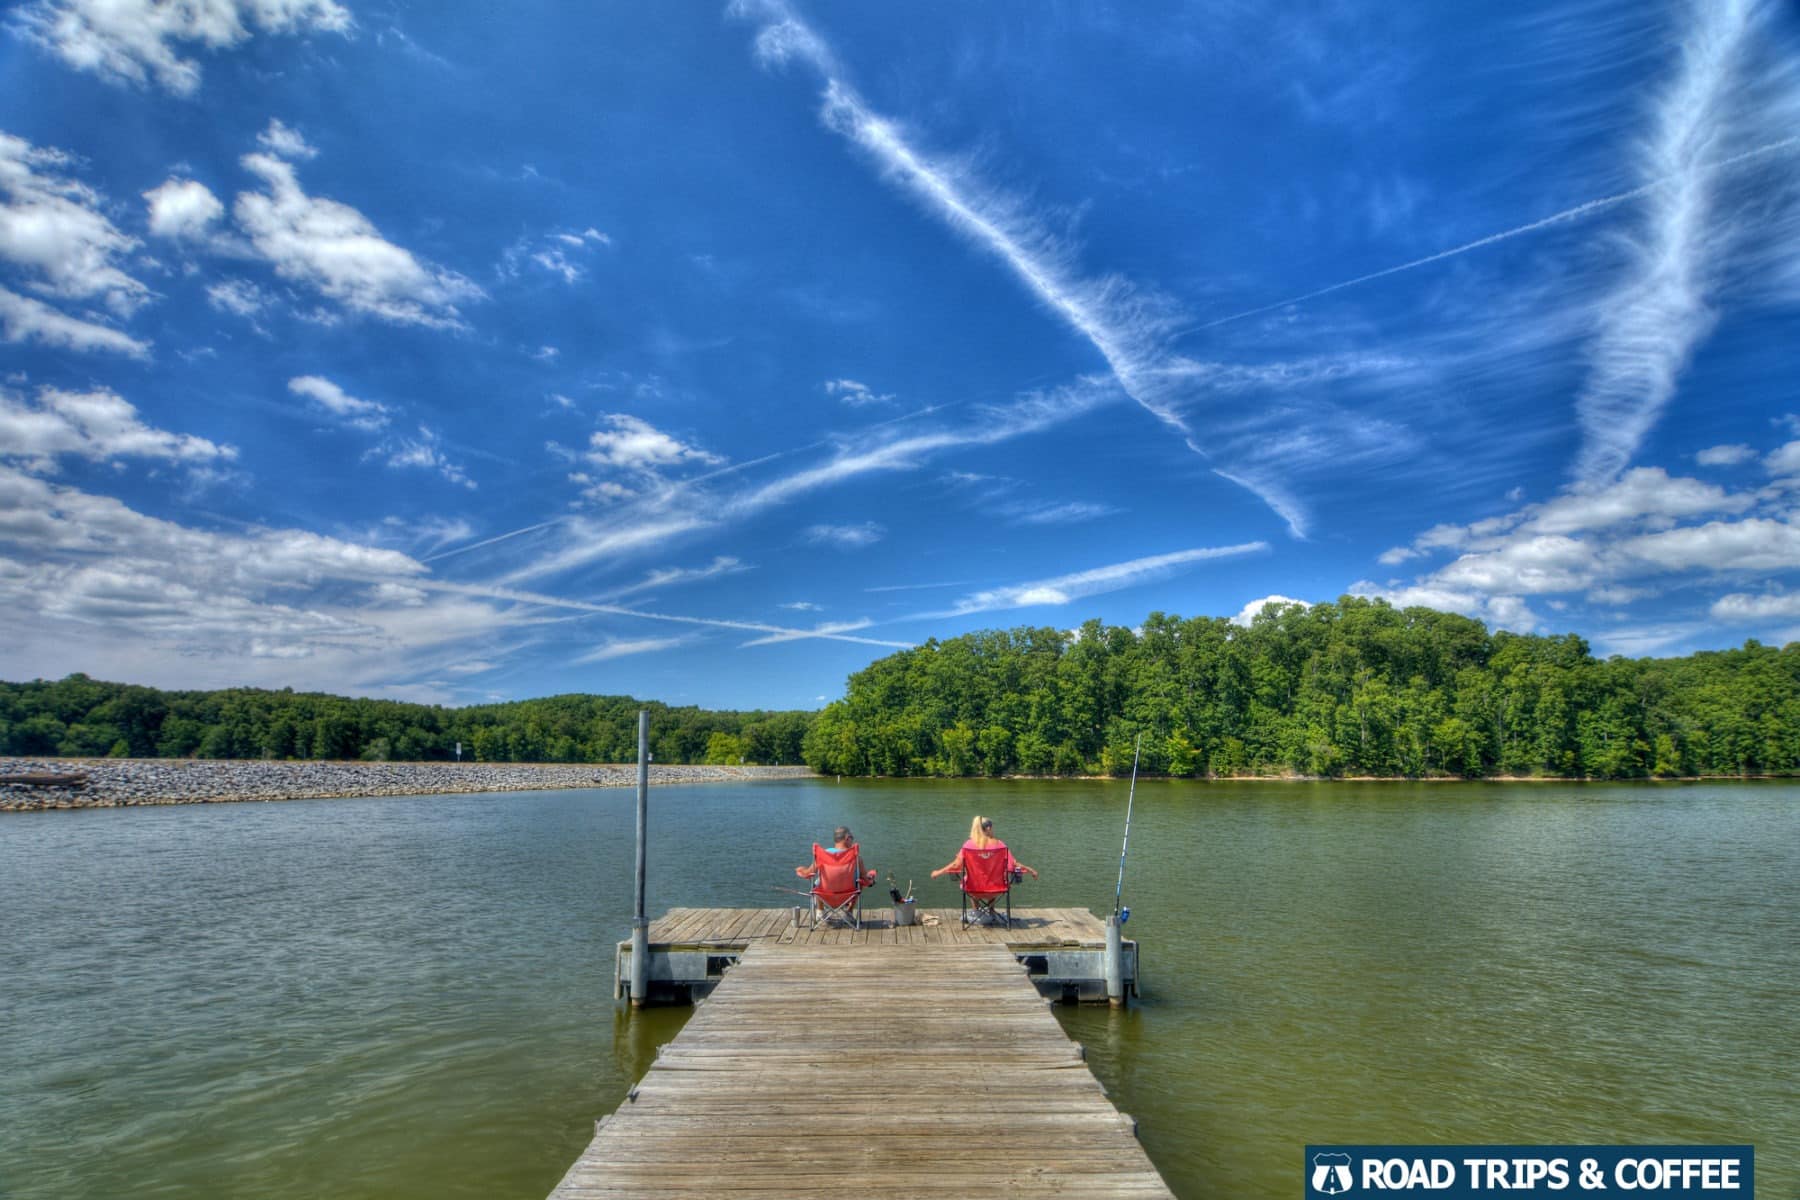 A man and woman sitting in bright red collapsible chairs on a pier fishing at the Energy Lake Day Use Area in Land Between the Lakes National Recreation Area